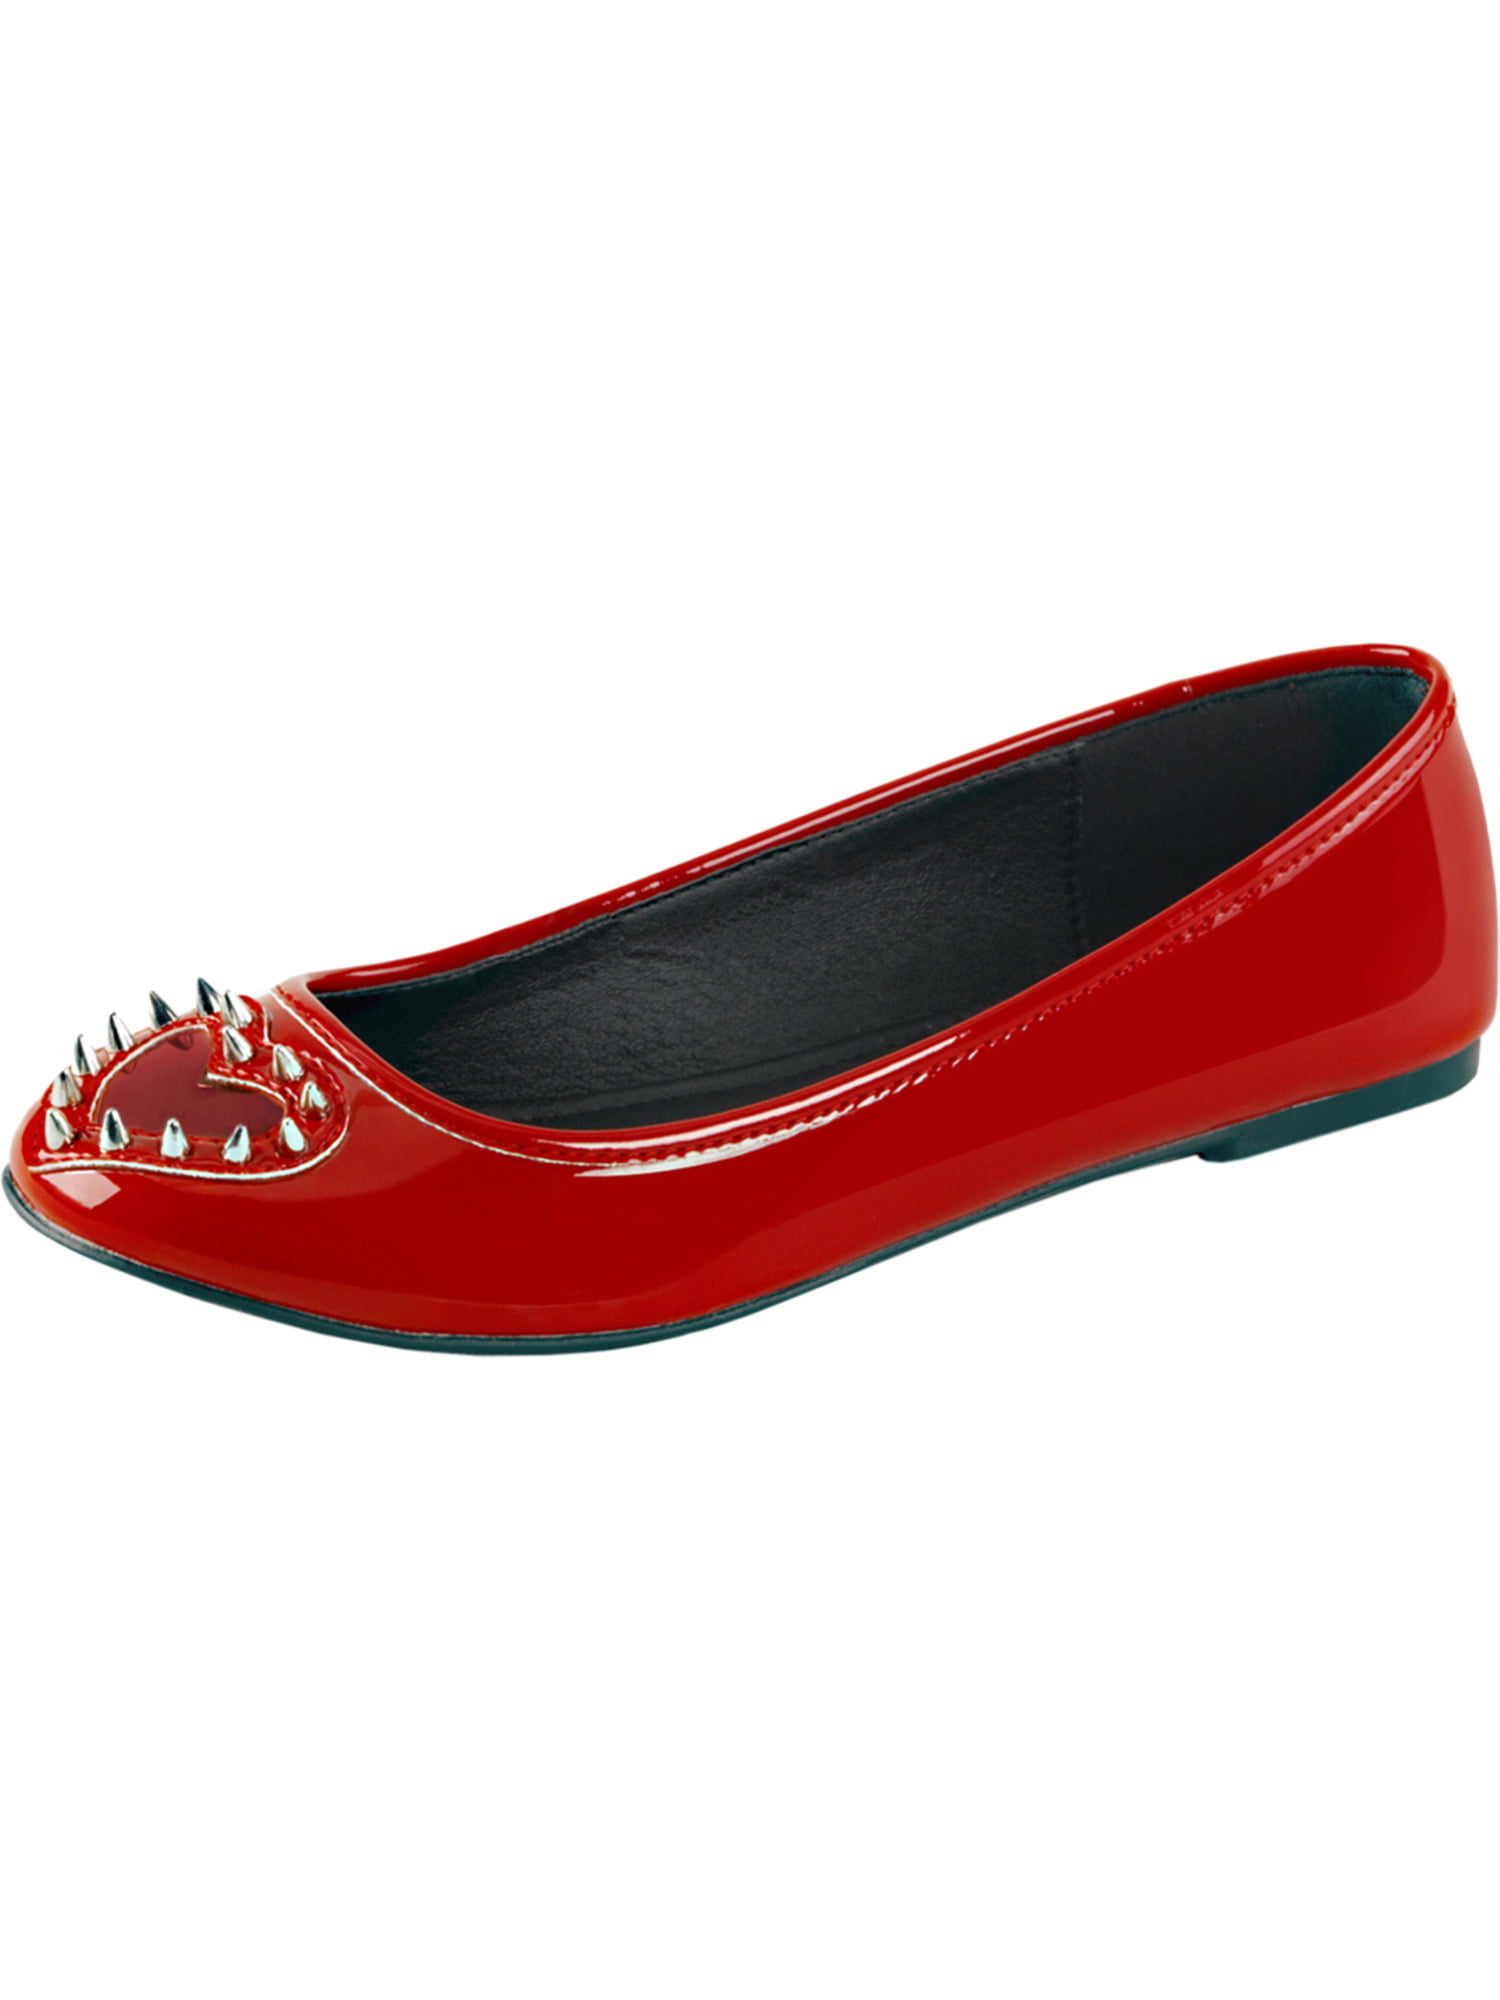 walmart womens red shoes